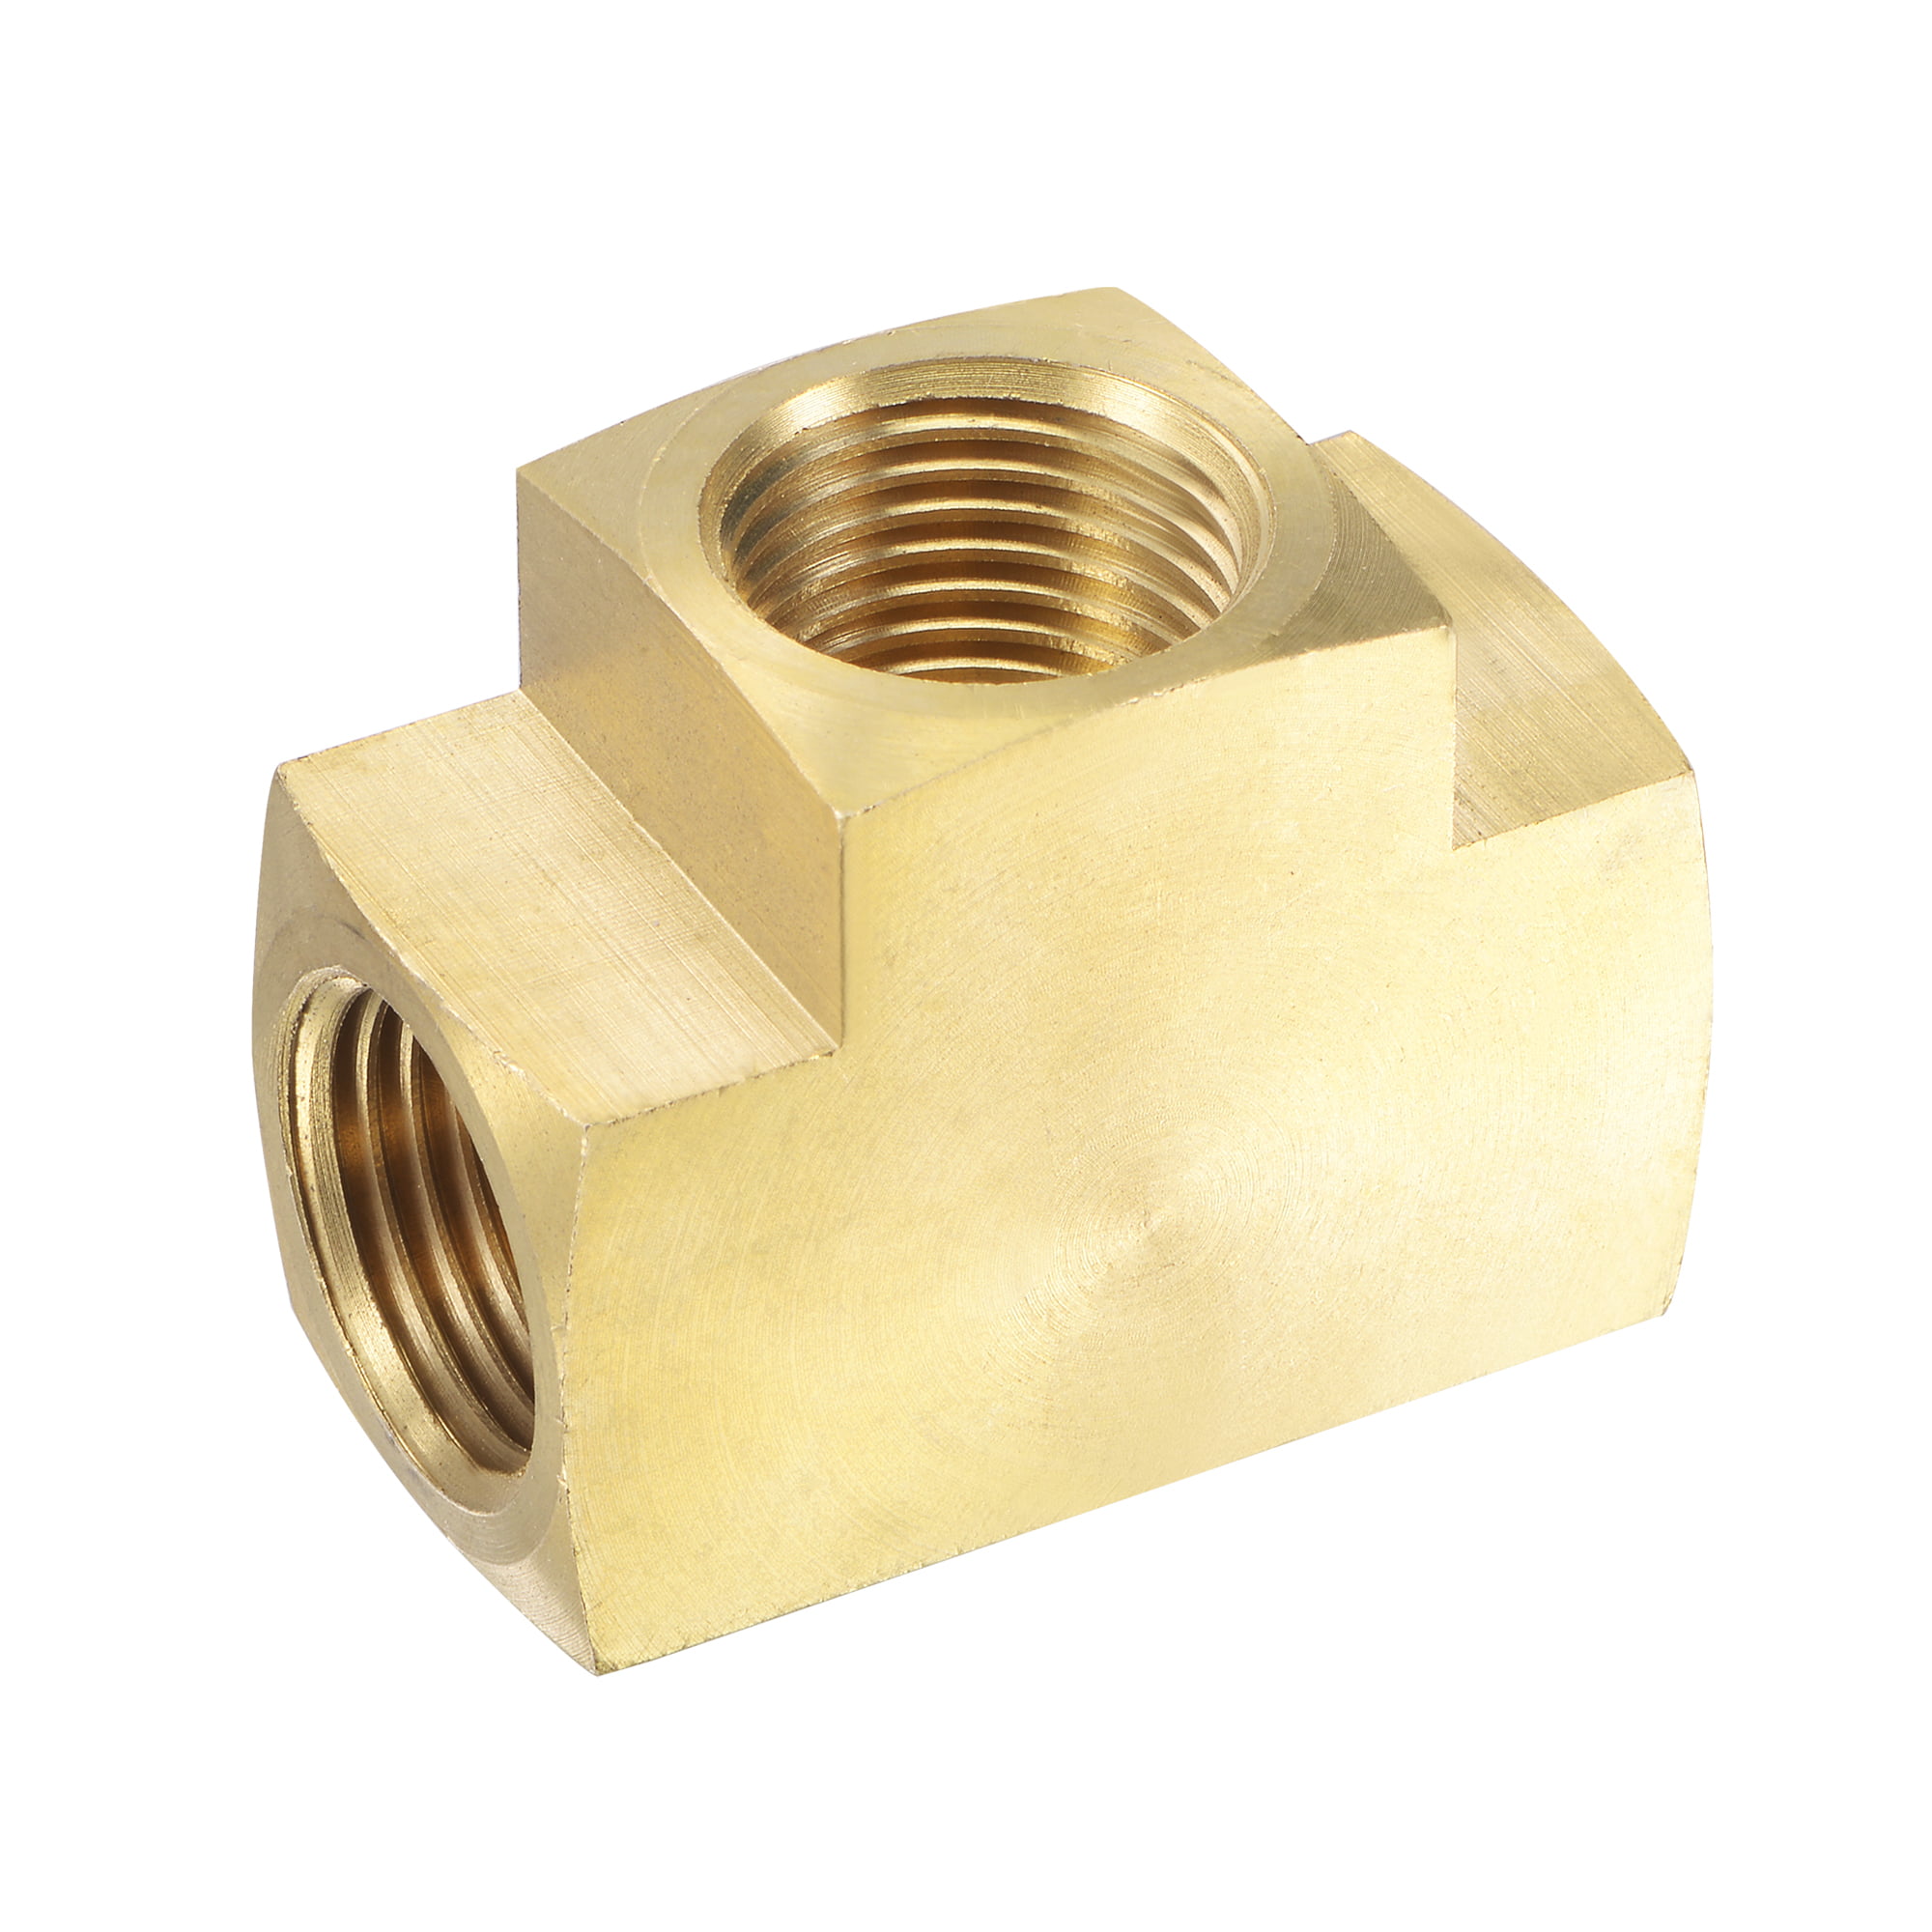 1/2'' gas pipe fittings 3-way female connector quality brass tube water air 